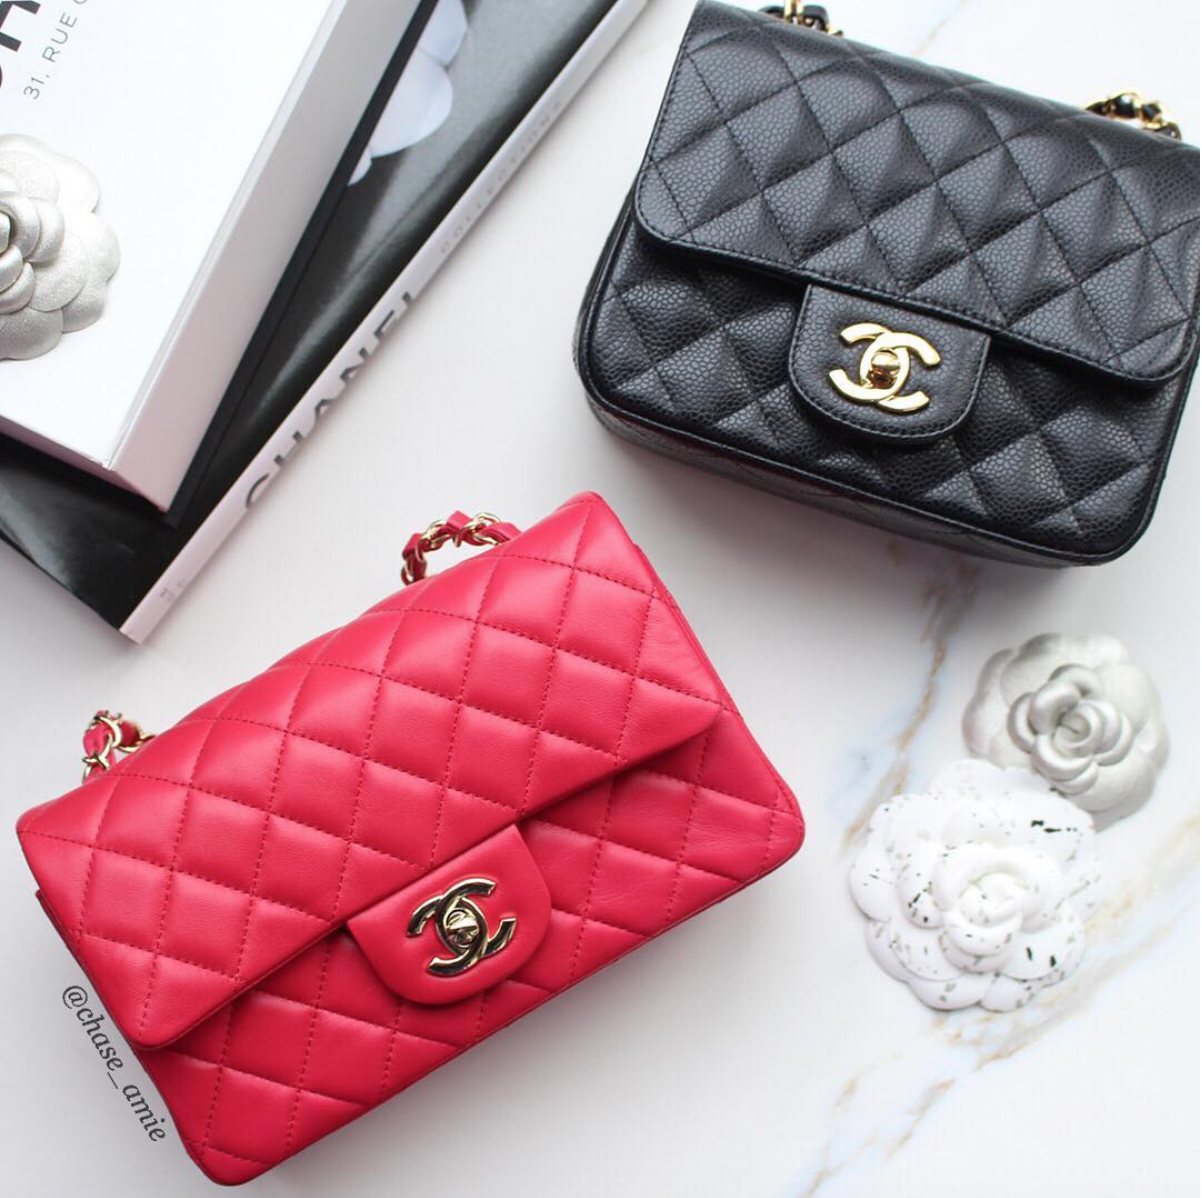 How To Buy a Chanel Mini - Chase Amie